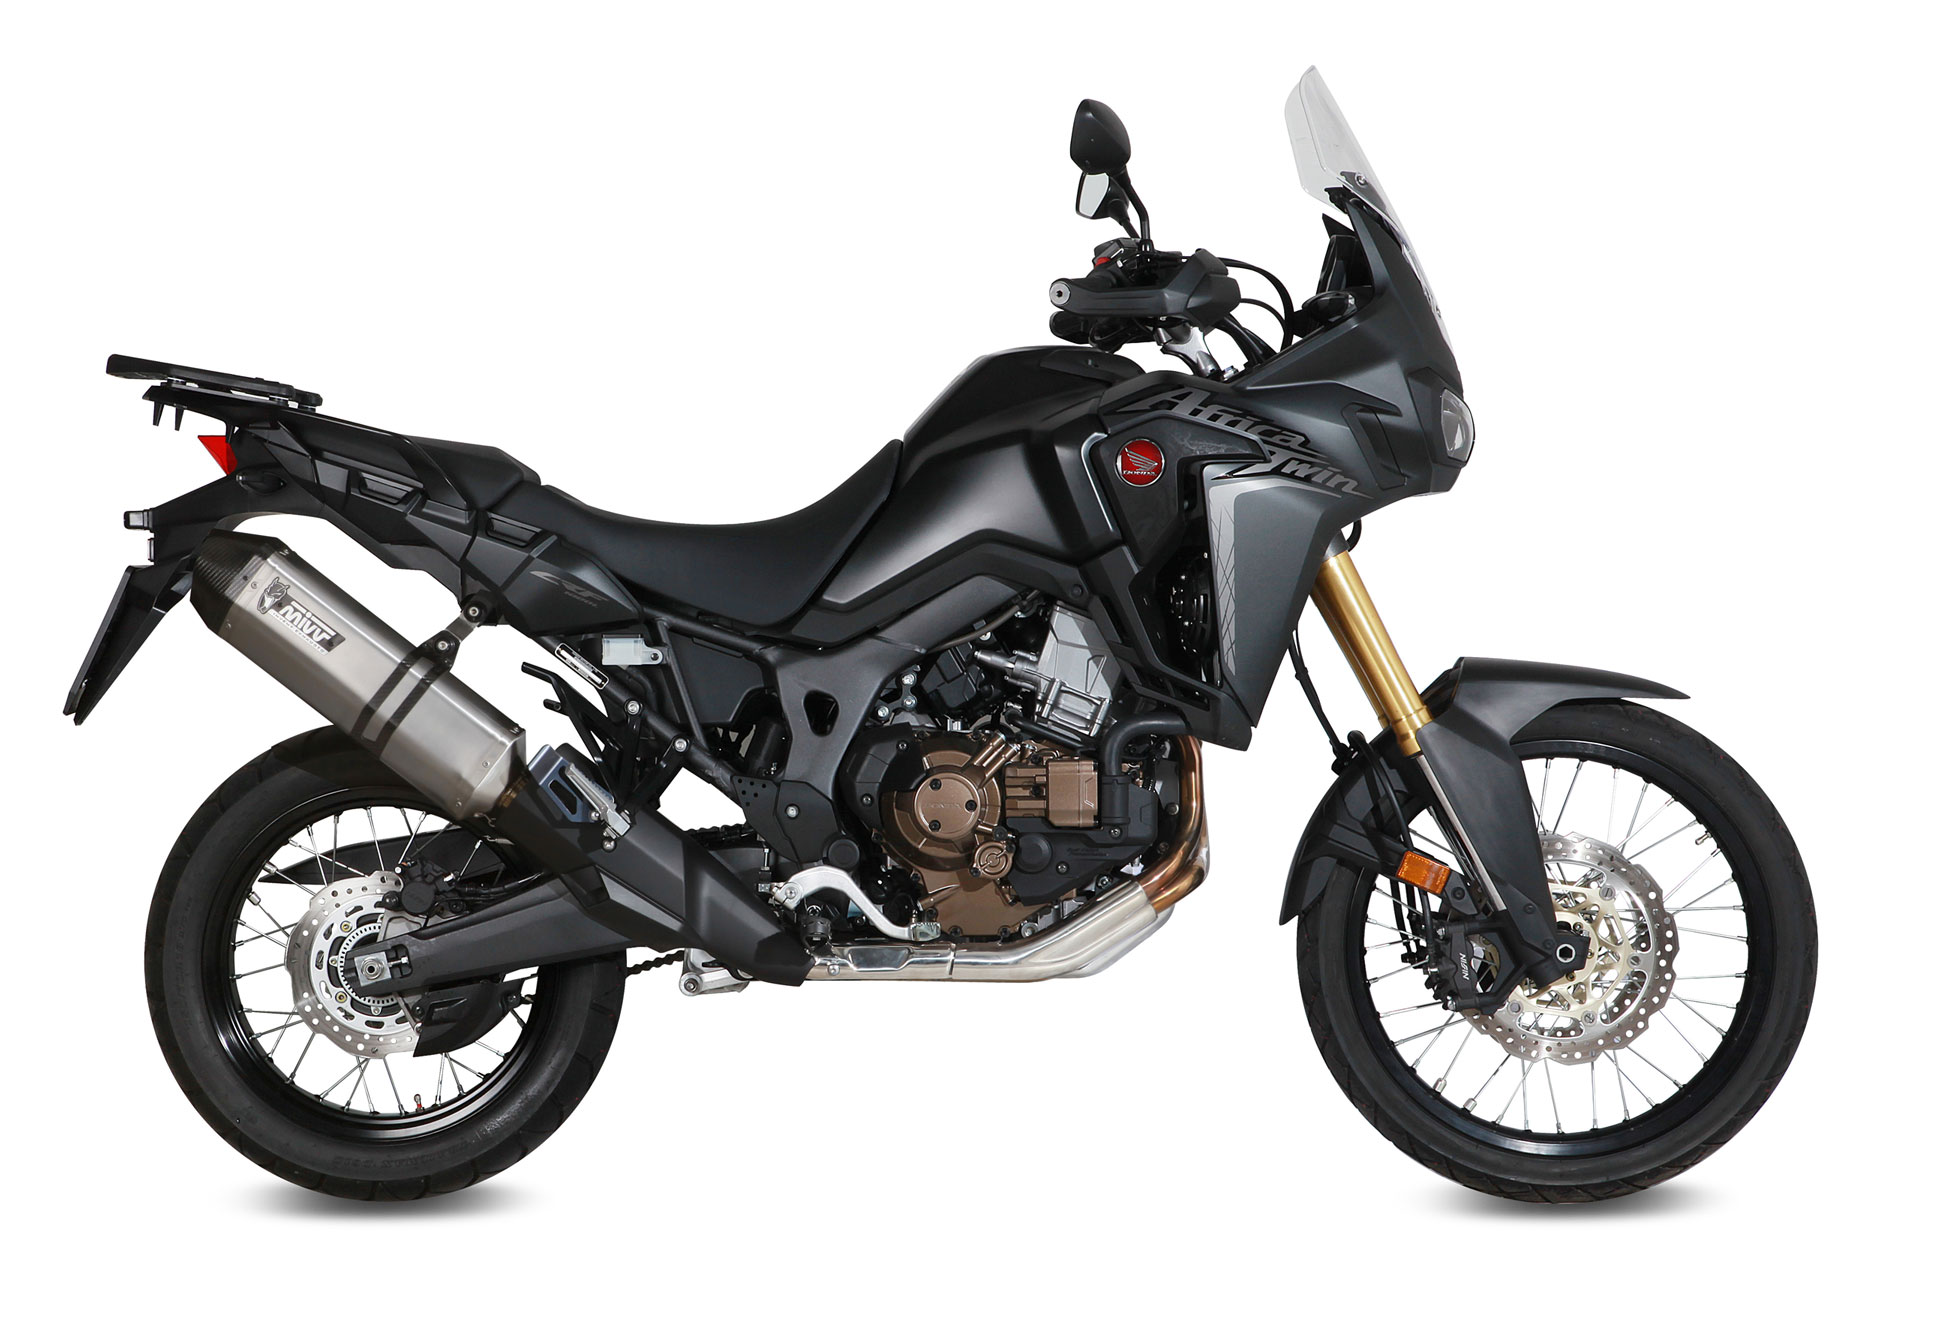 CRF1000L AfricaTwin with MIVV Speed Edge 1